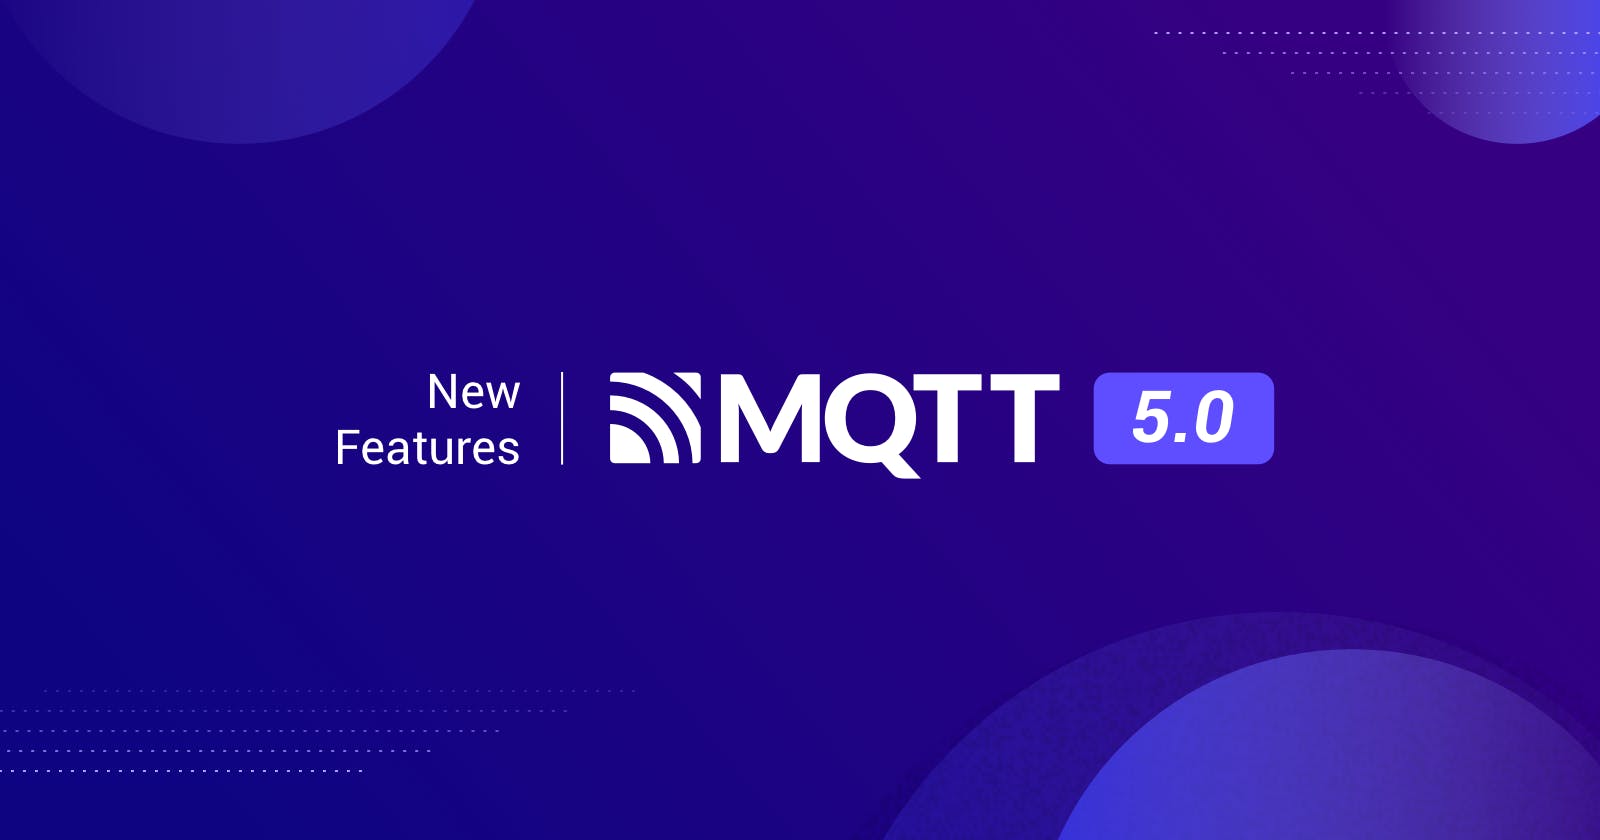 Subscription Identifier and Subscription Options - MQTT 5.0 New Features